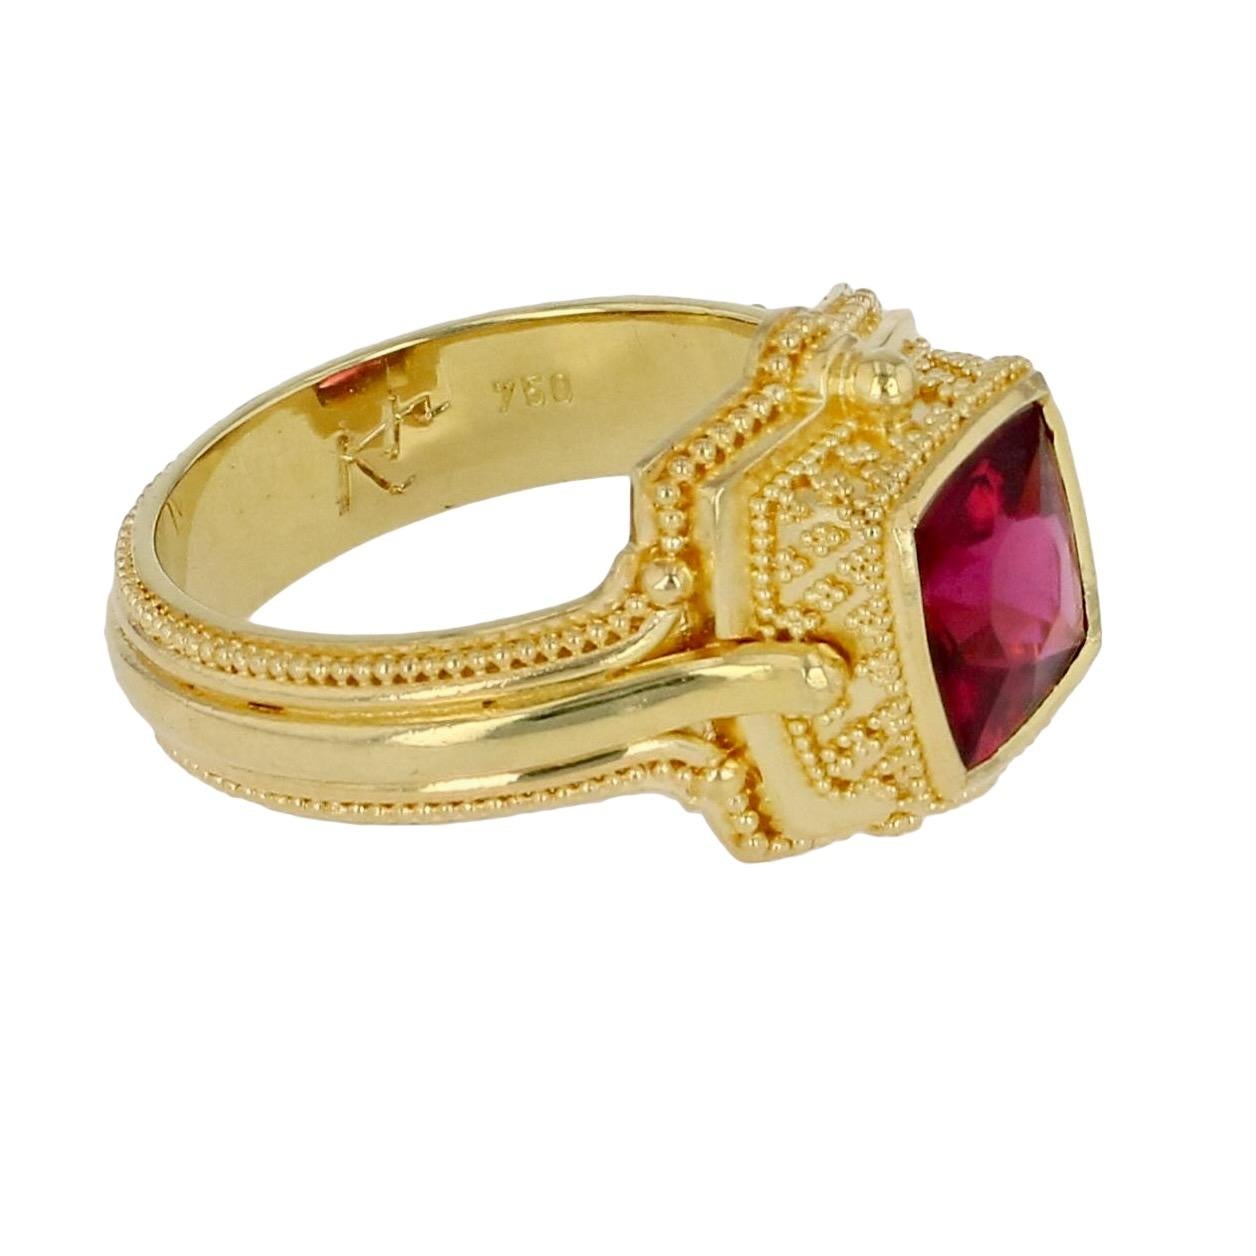 Kent Raible 18 Karat Rubellite Tourmaline Cocktail Ring with Fine Granulation In New Condition For Sale In Mossrock, WA